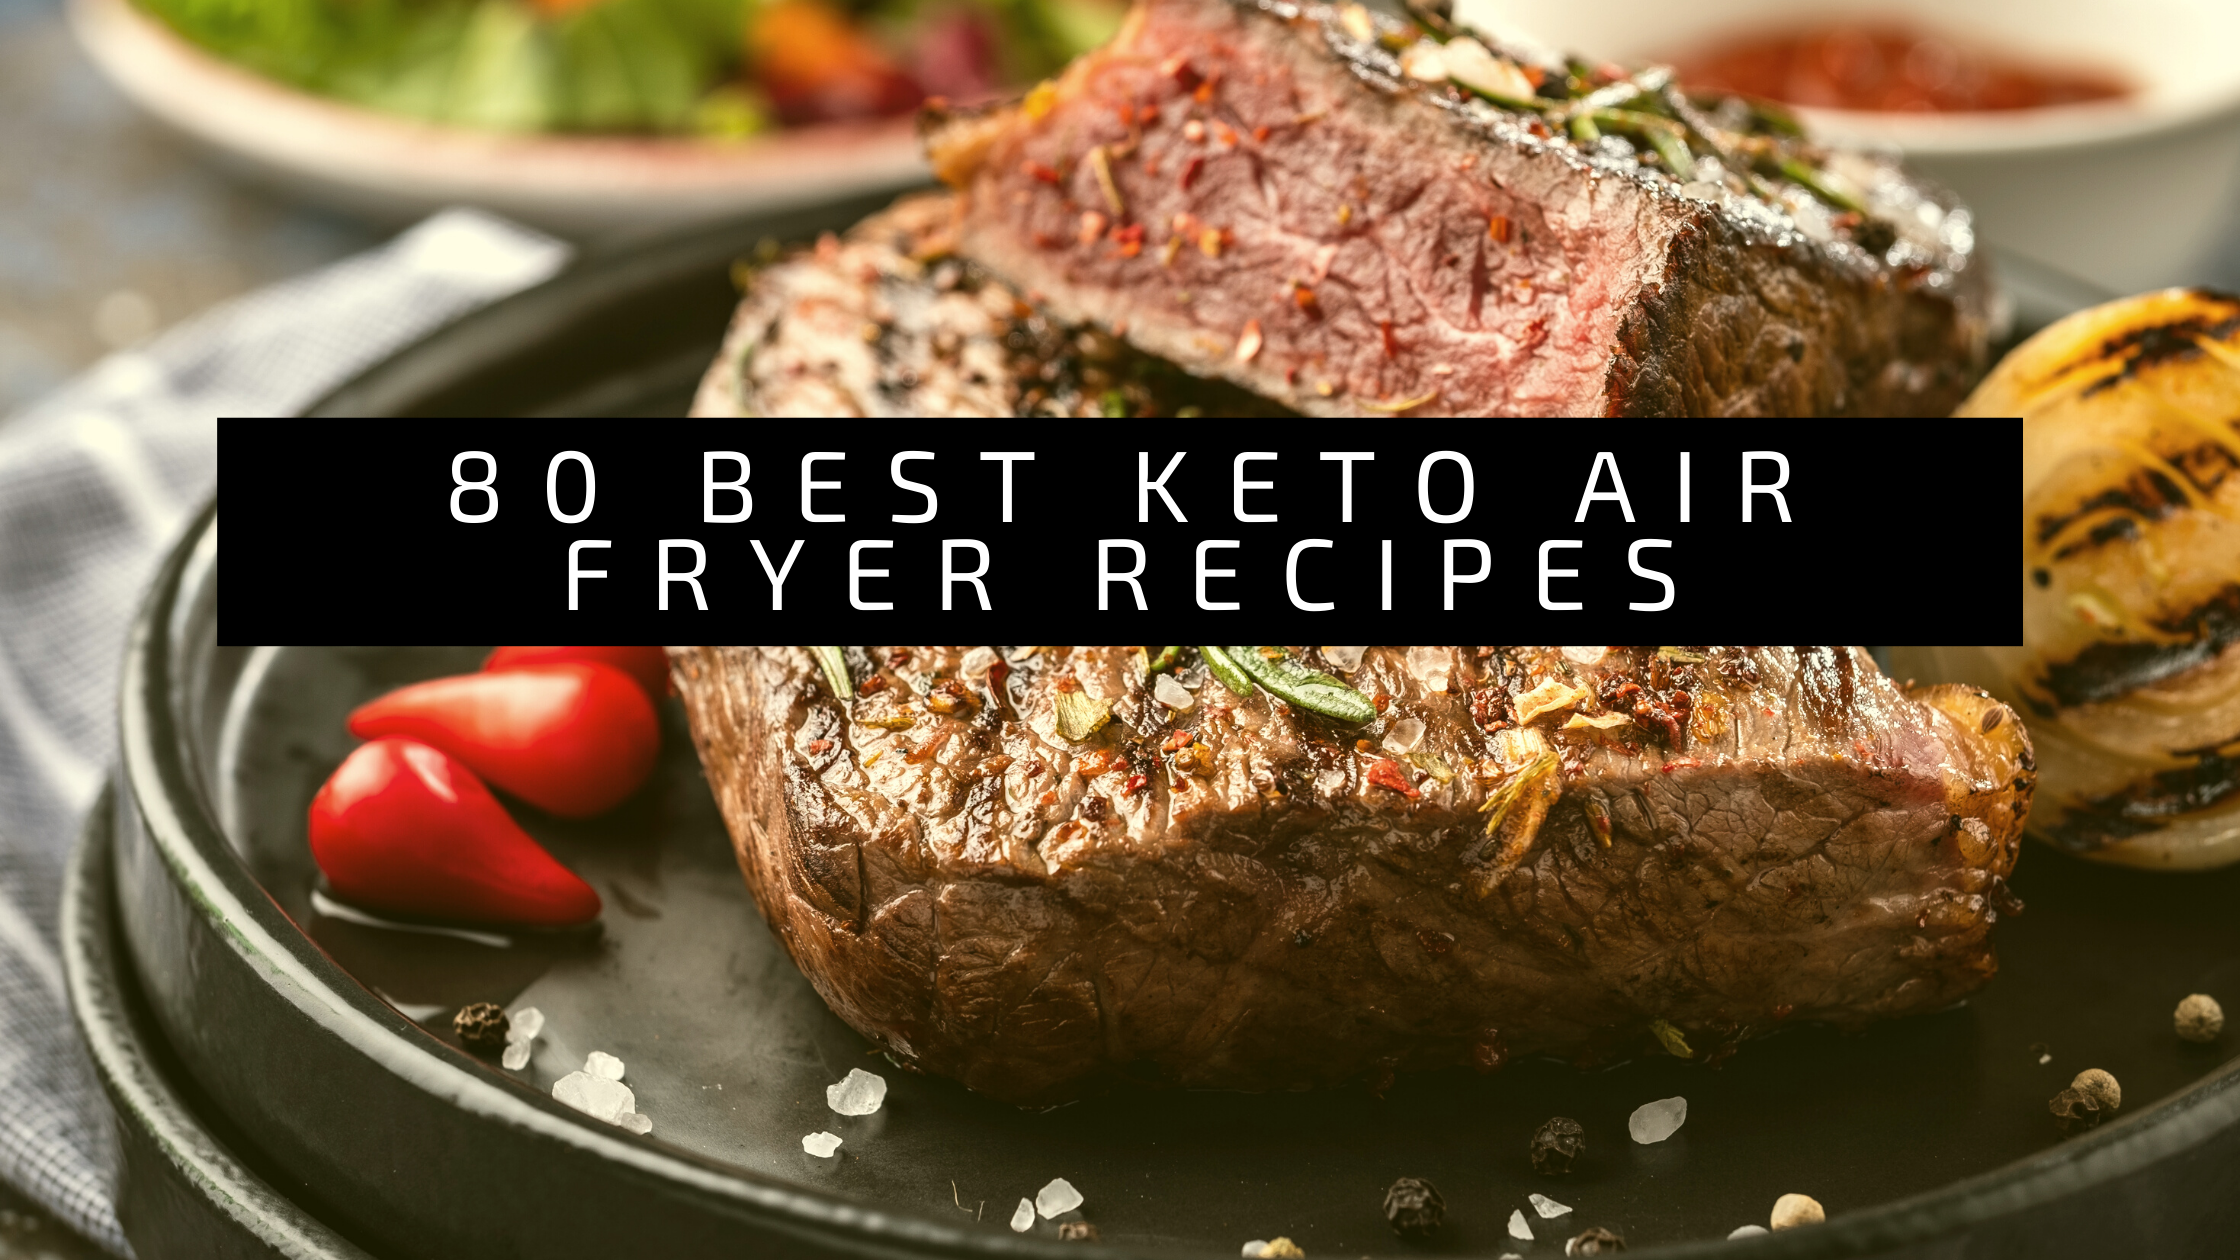 40 Family-Friendly Keto Air Fryer Recipes for Quick and Delicious Meals 14